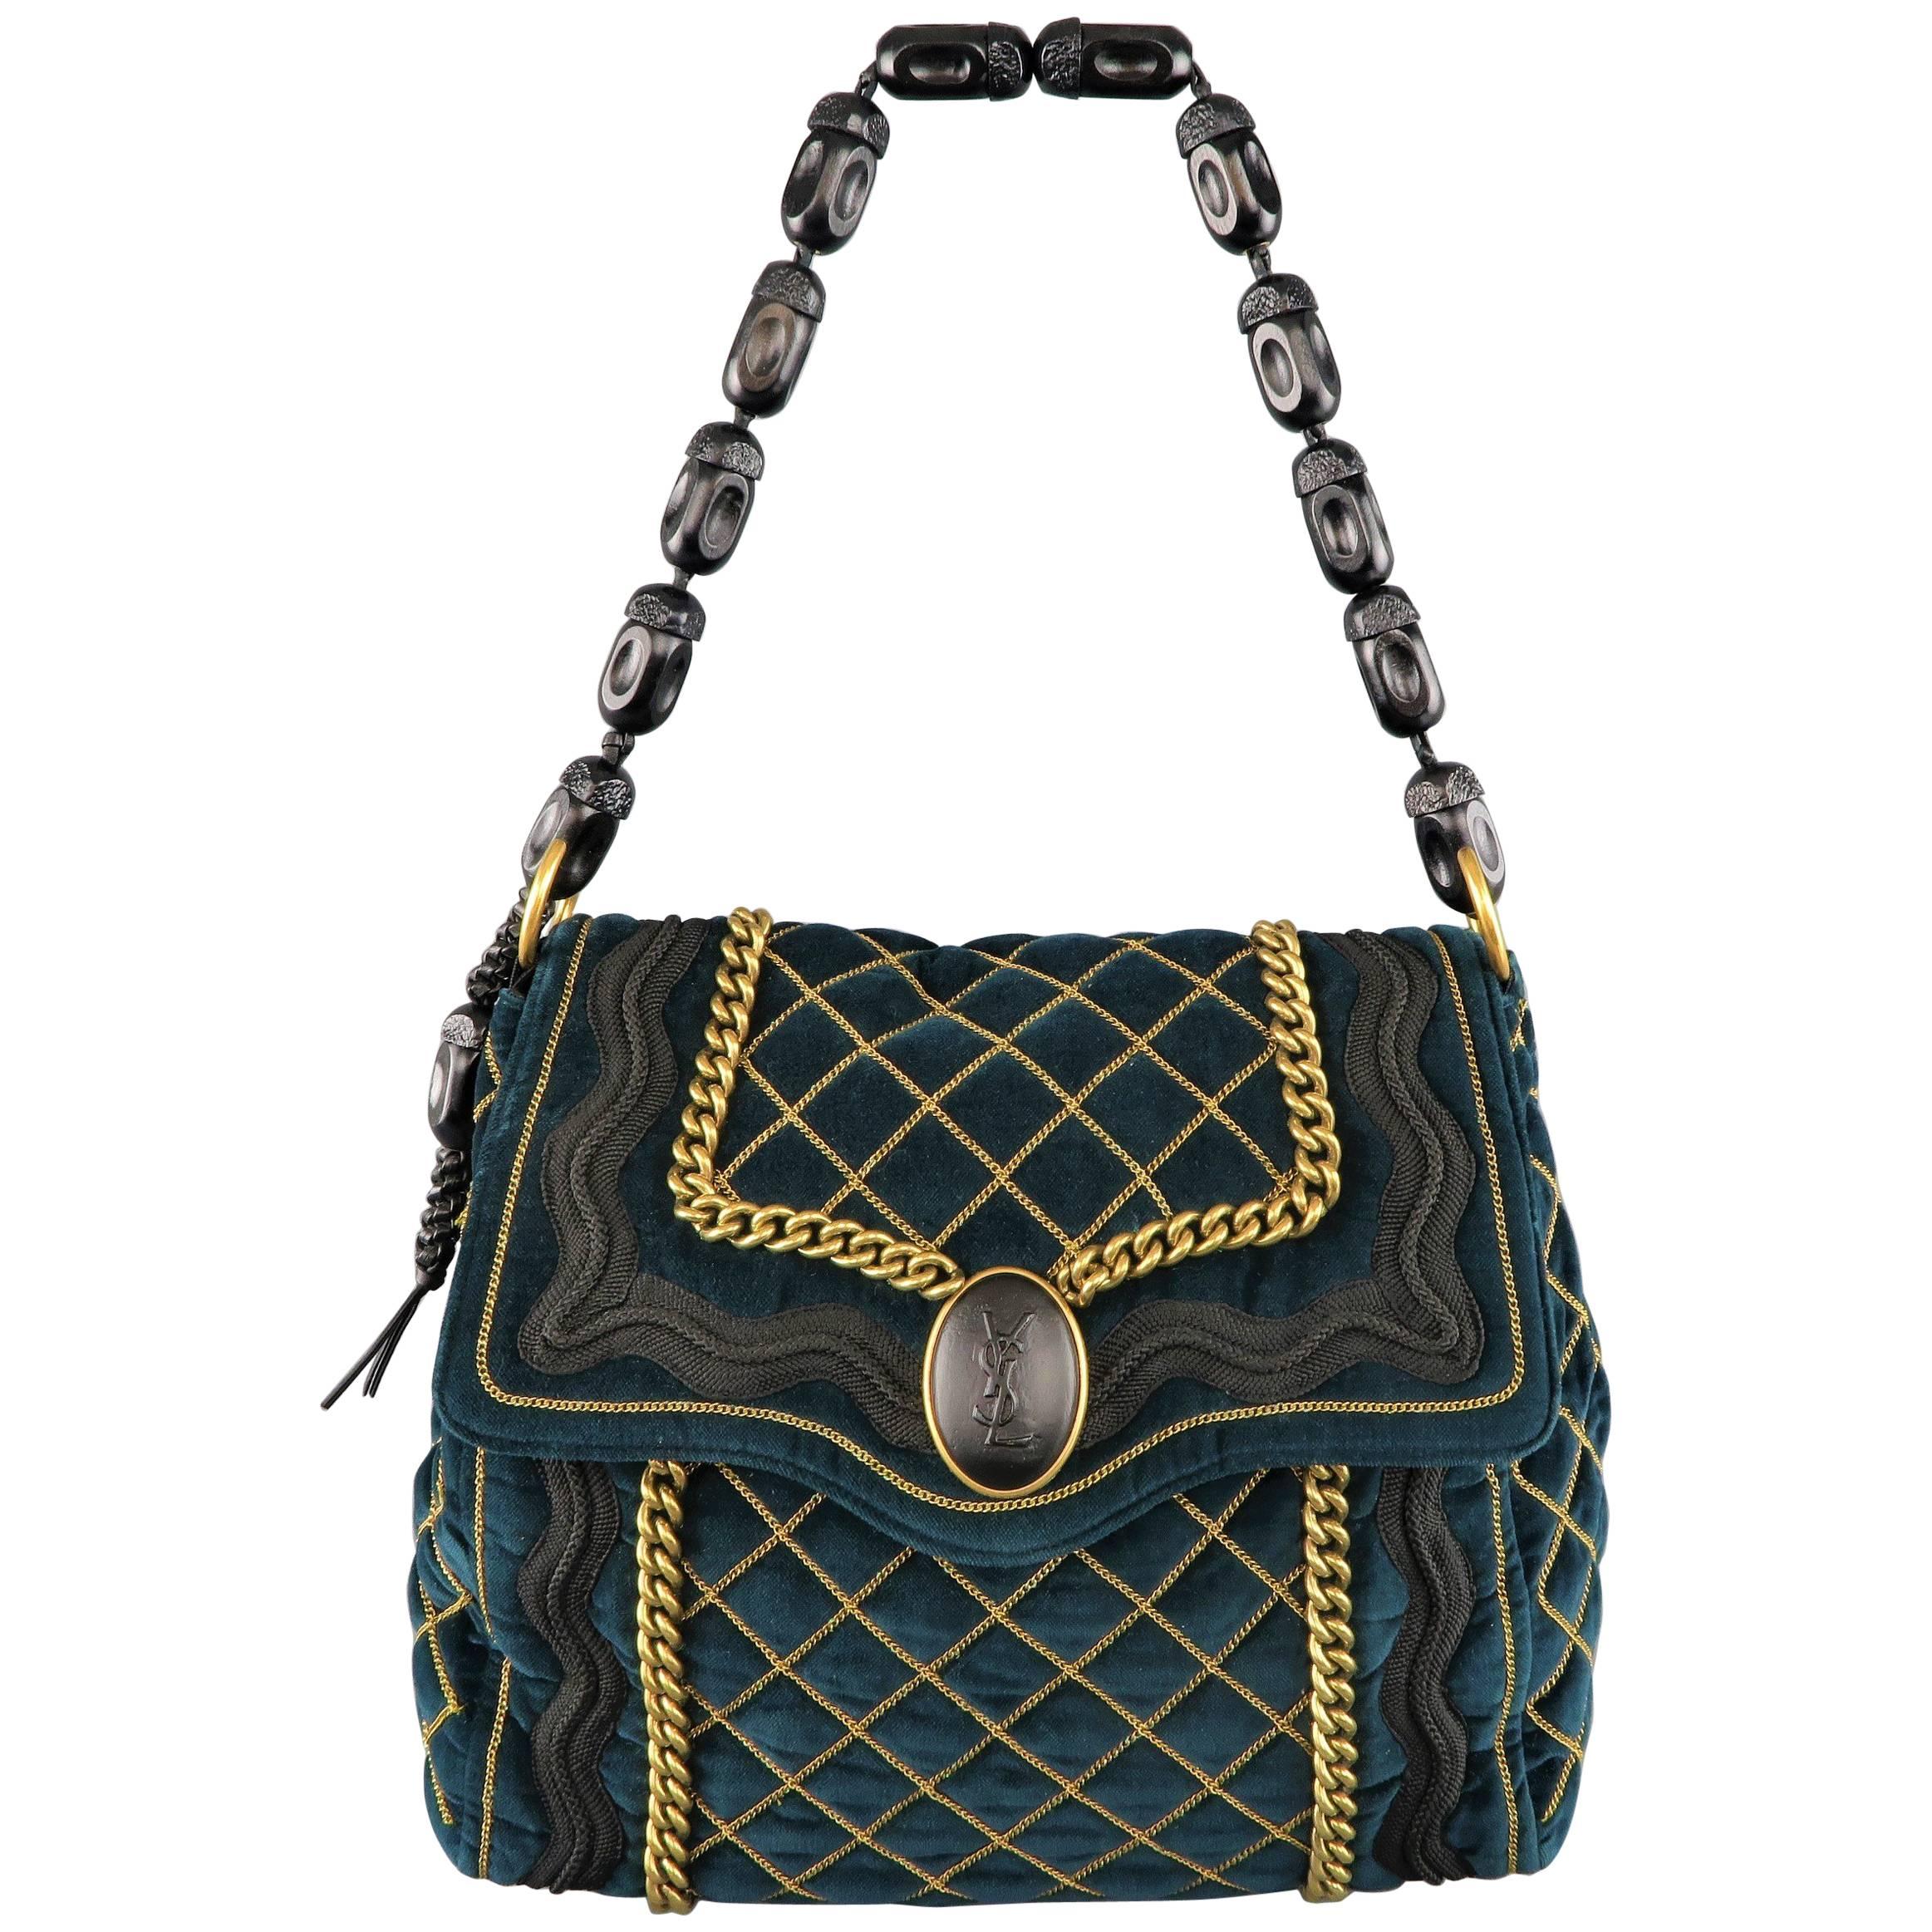 Yves Saint Laurent Green and Gold Chain Quilted Velvet Sac Luxembourg Bag